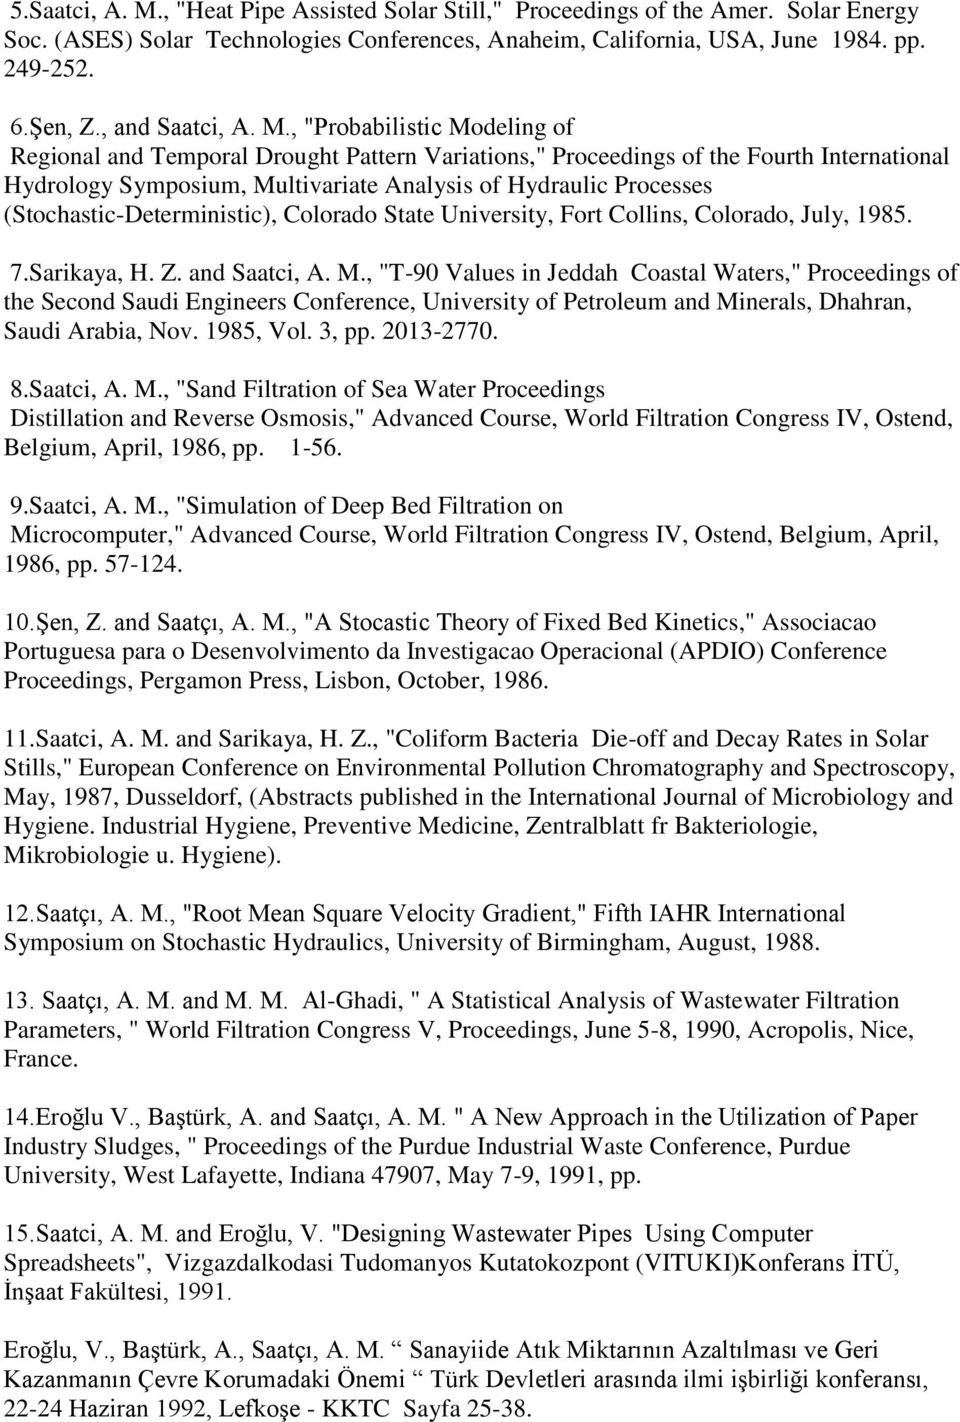 , "Probabilistic Modeling of Regional and Temporal Drought Pattern Variations," Proceedings of the Fourth International Hydrology Symposium, Multivariate Analysis of Hydraulic Processes